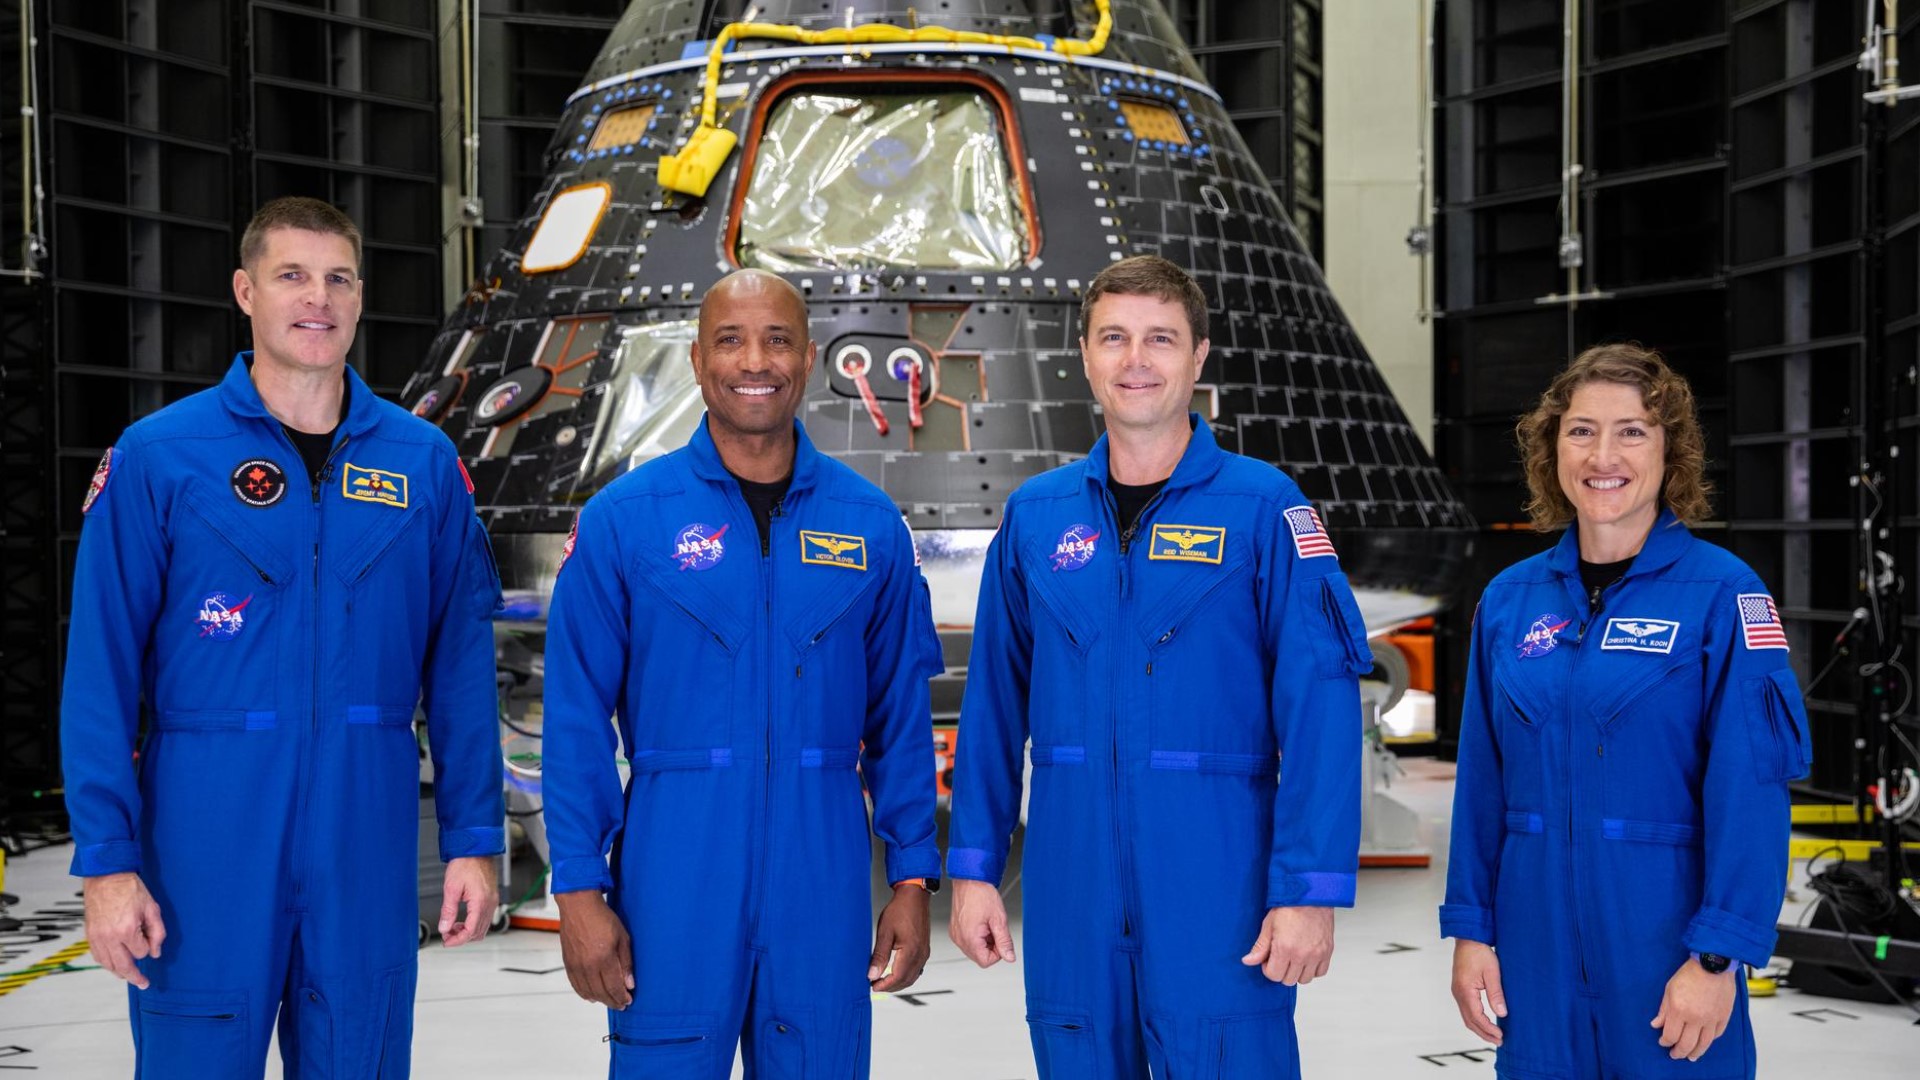 Artemis II will send a crew of four astronauts on a journey around the Moon.